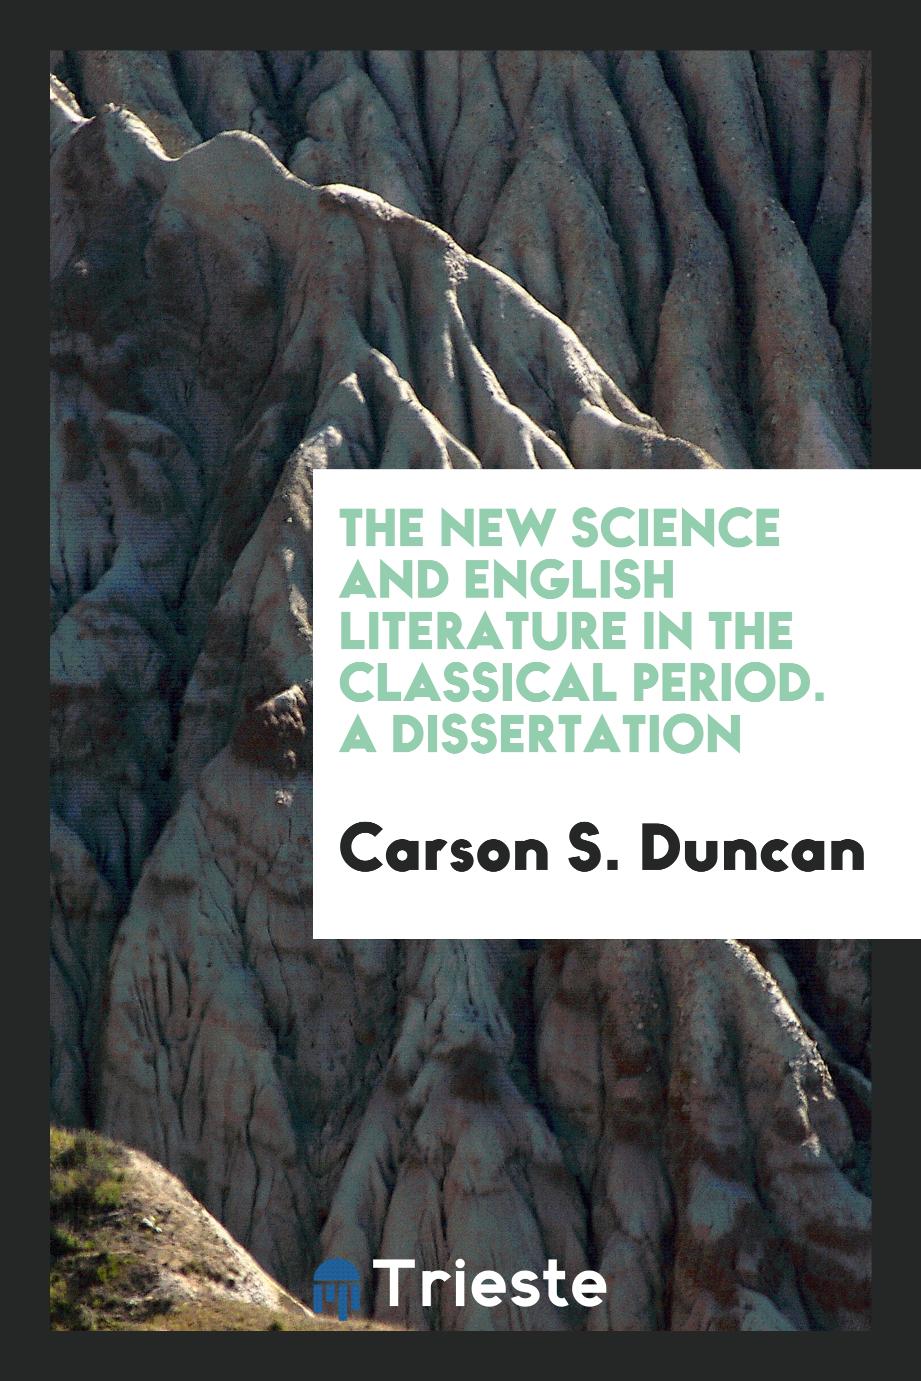 The new science and English literature in the classical period. A dissertation